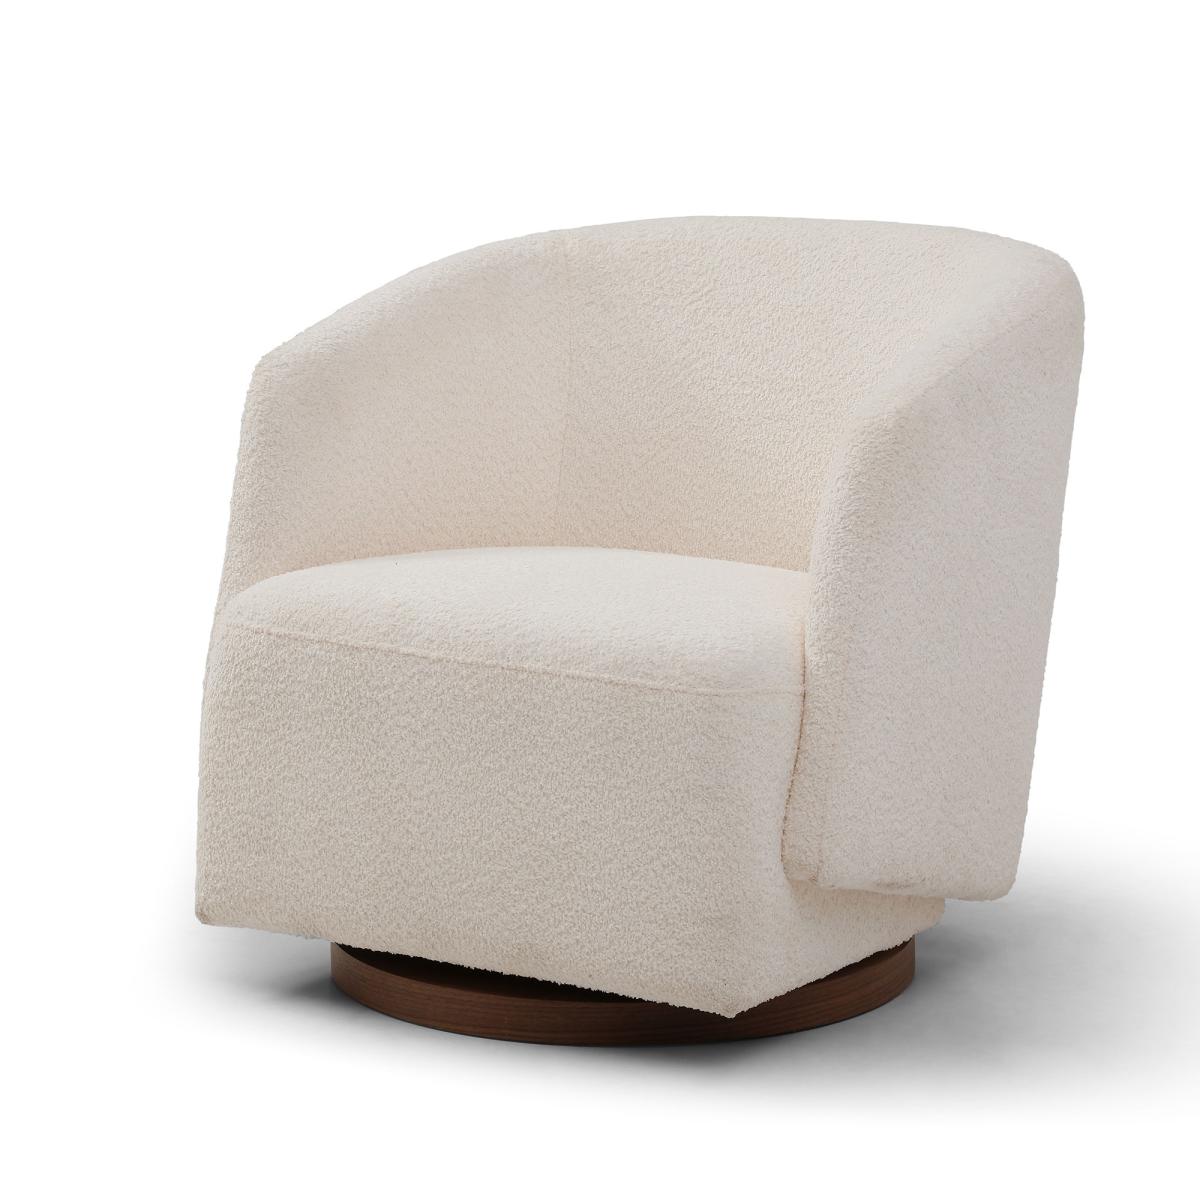 Swivel Accent Chair Armchair Round Barrel Chair for Living Room Bedroom